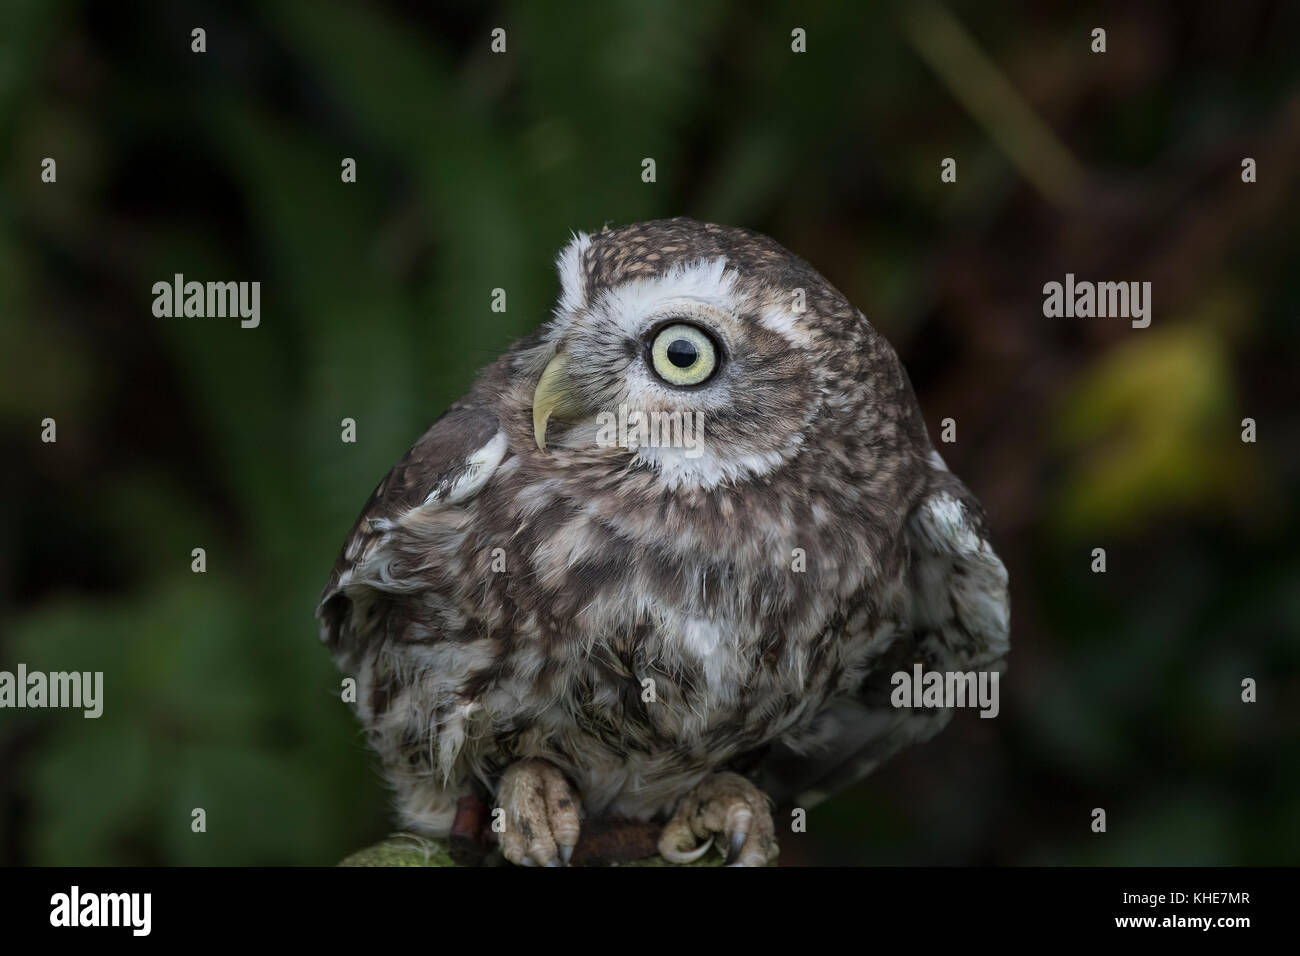 little owl, Athene noctua, close up portrait displaying expression of face and body perched near a hedgerow in Devon, England during autumn. Stock Photo